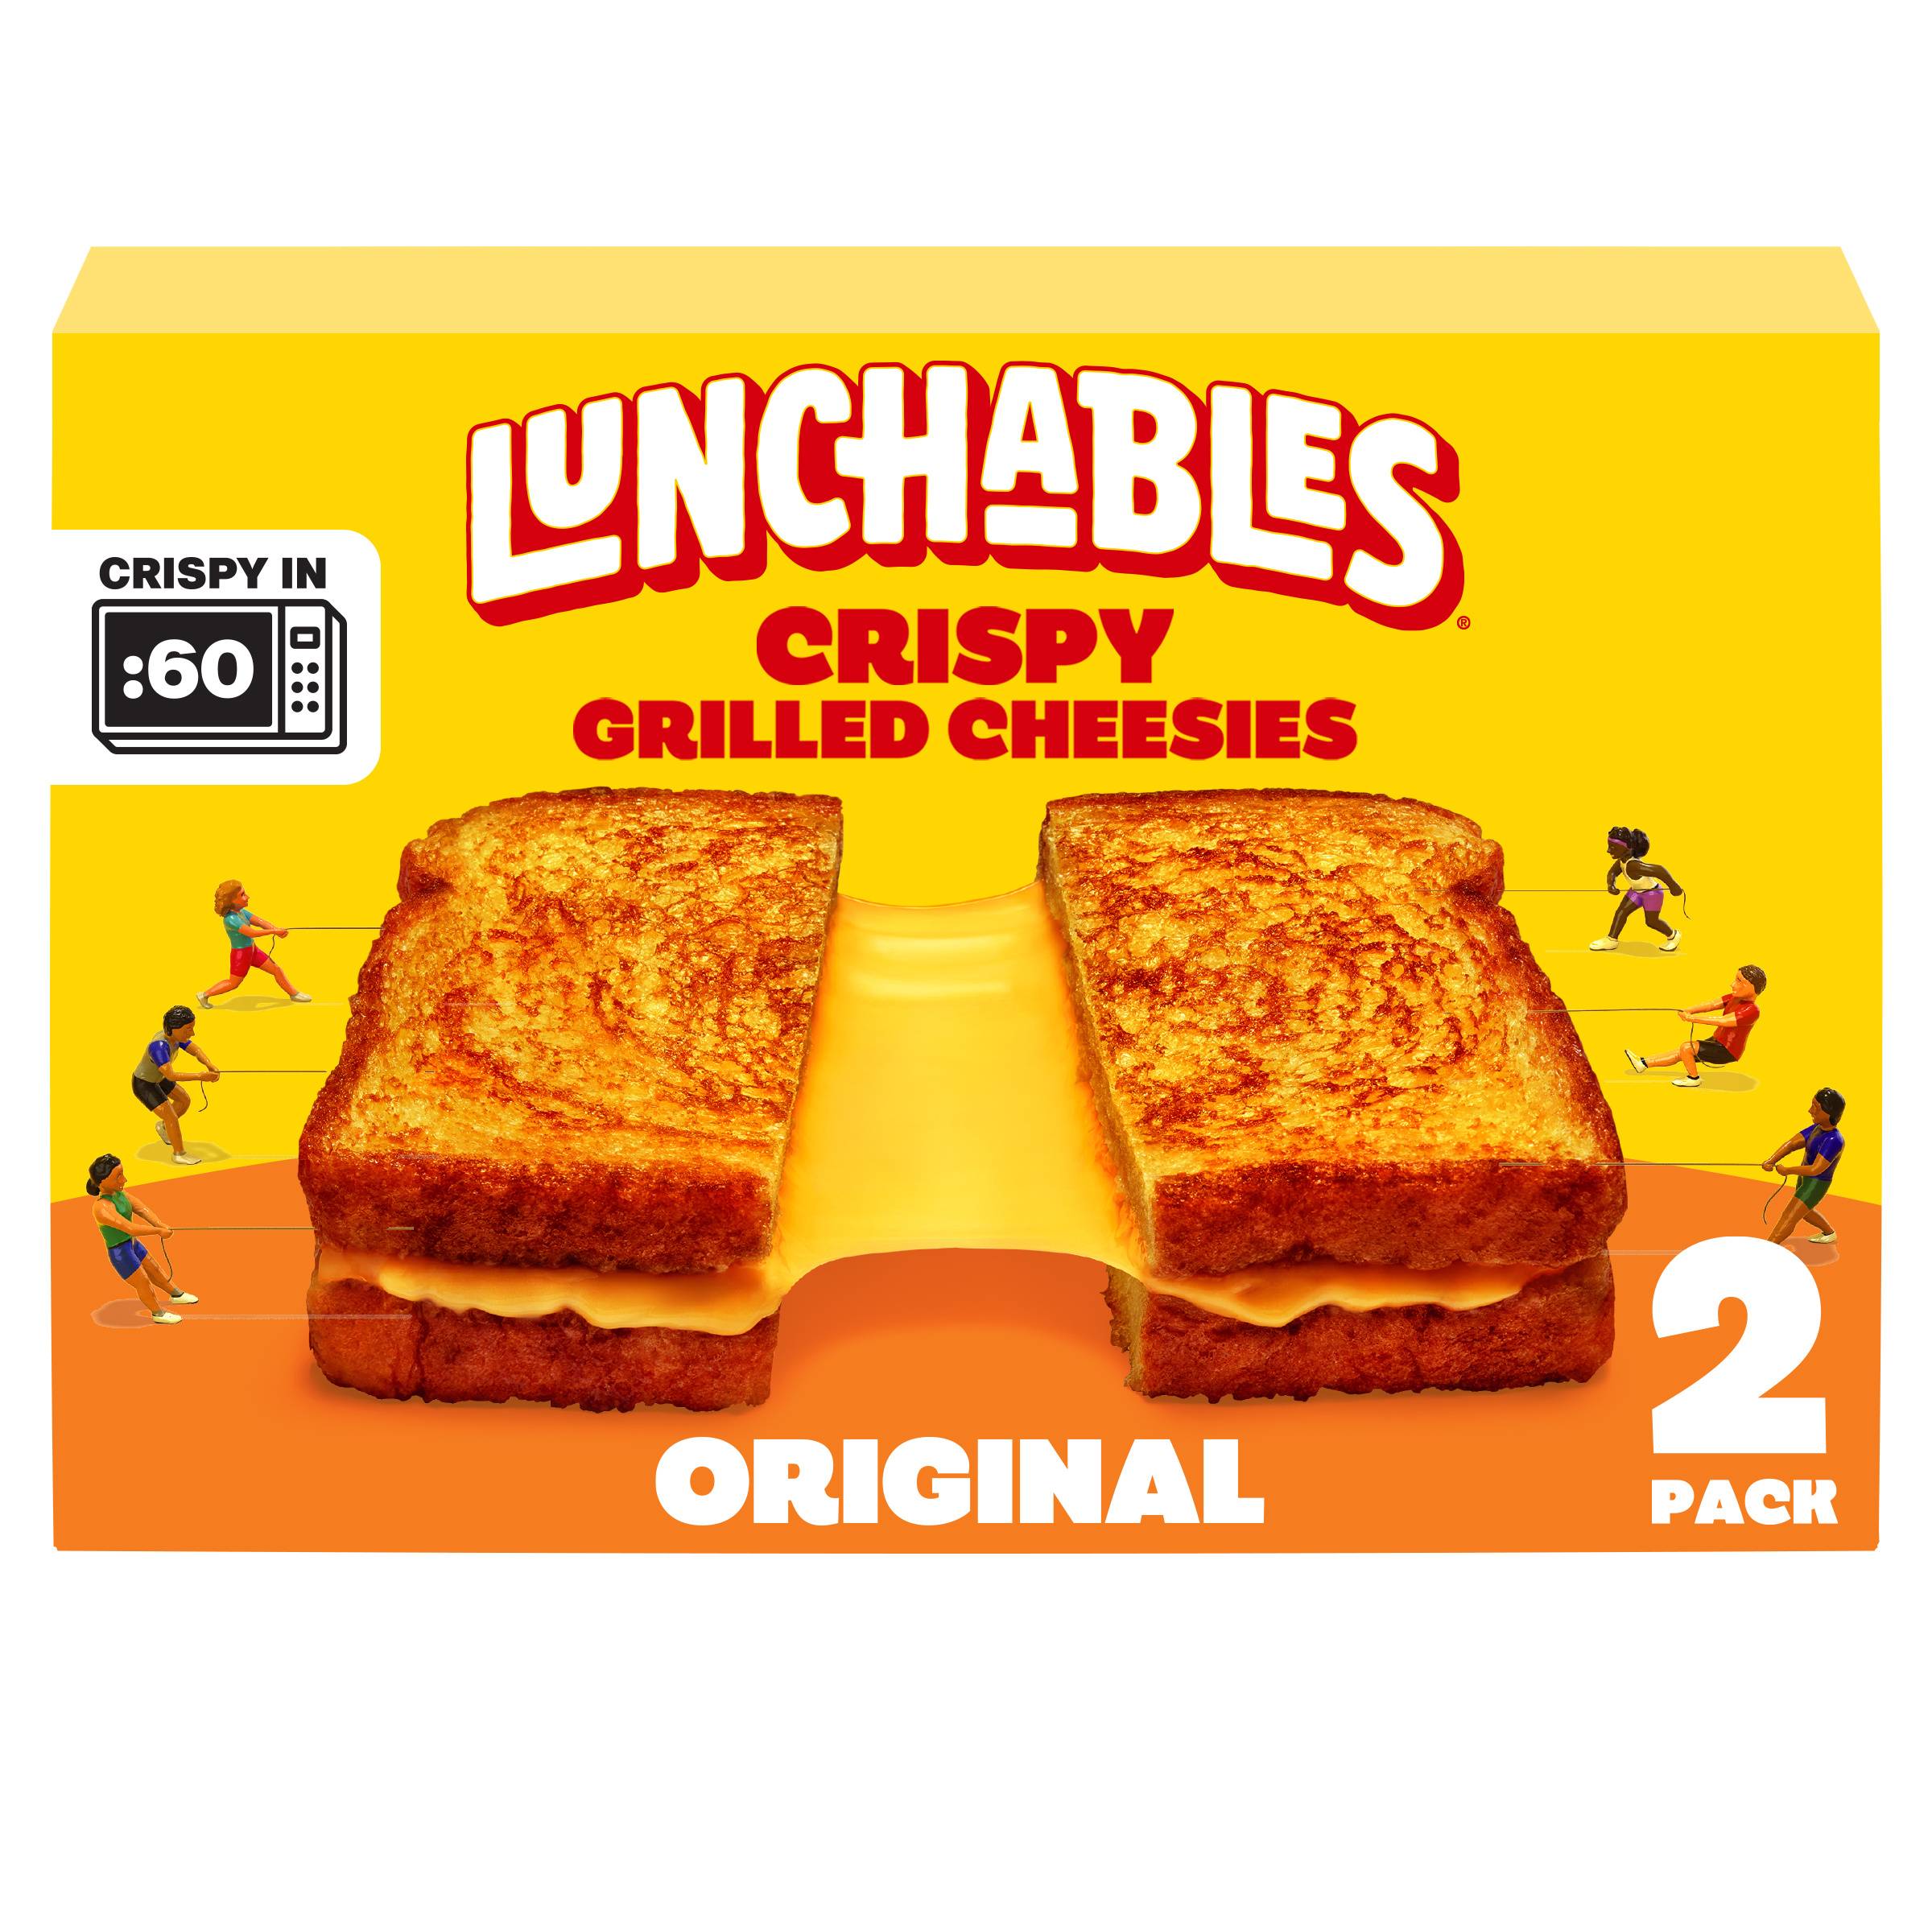 Lunchables Crispy Grilled Cheesies, 2ct